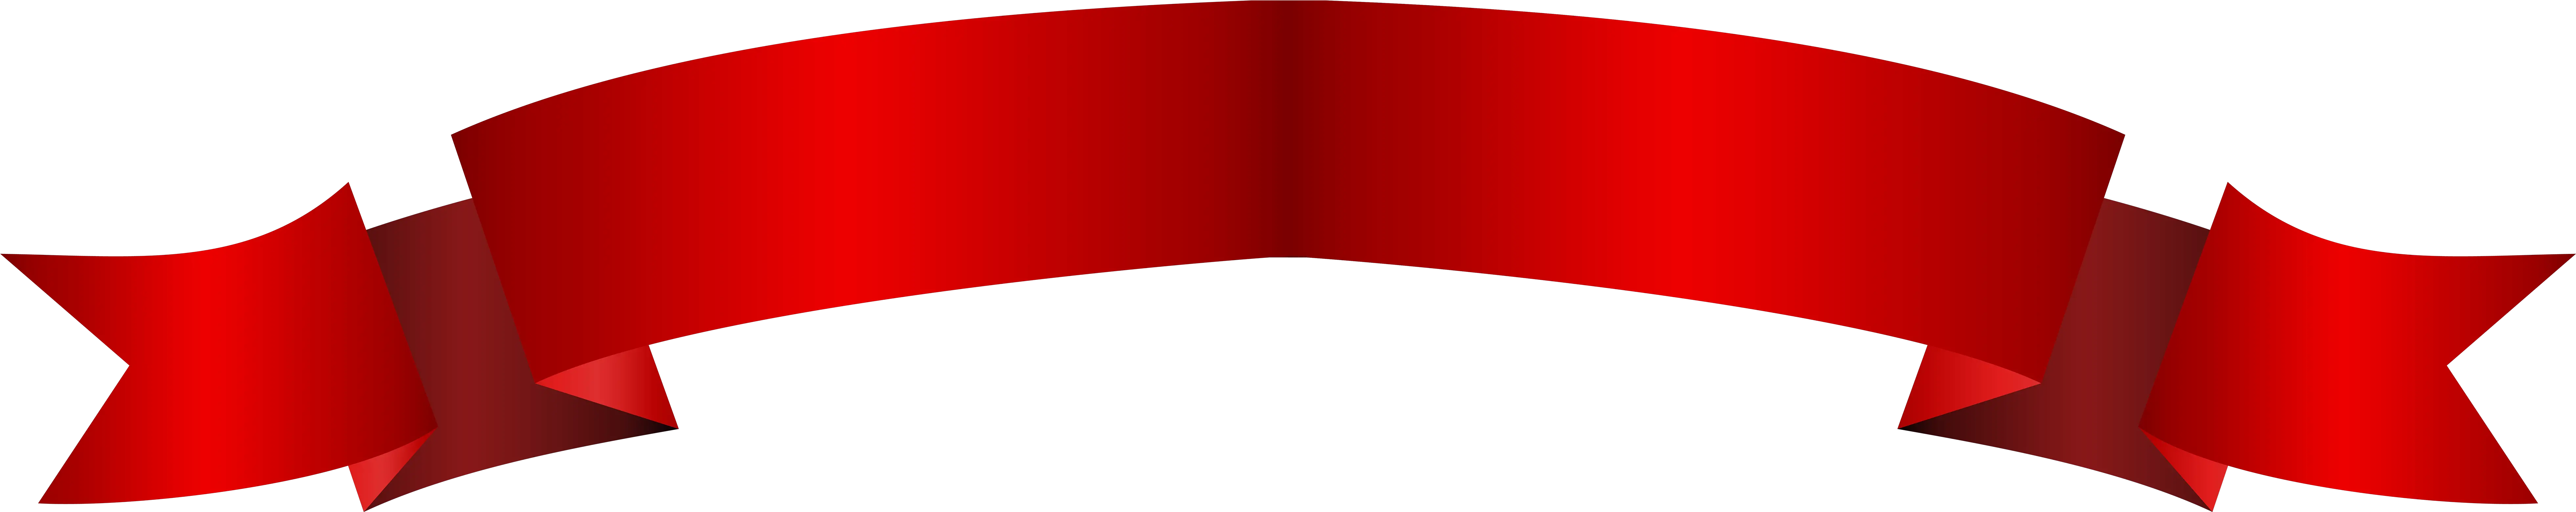 Banner Cut Out Png